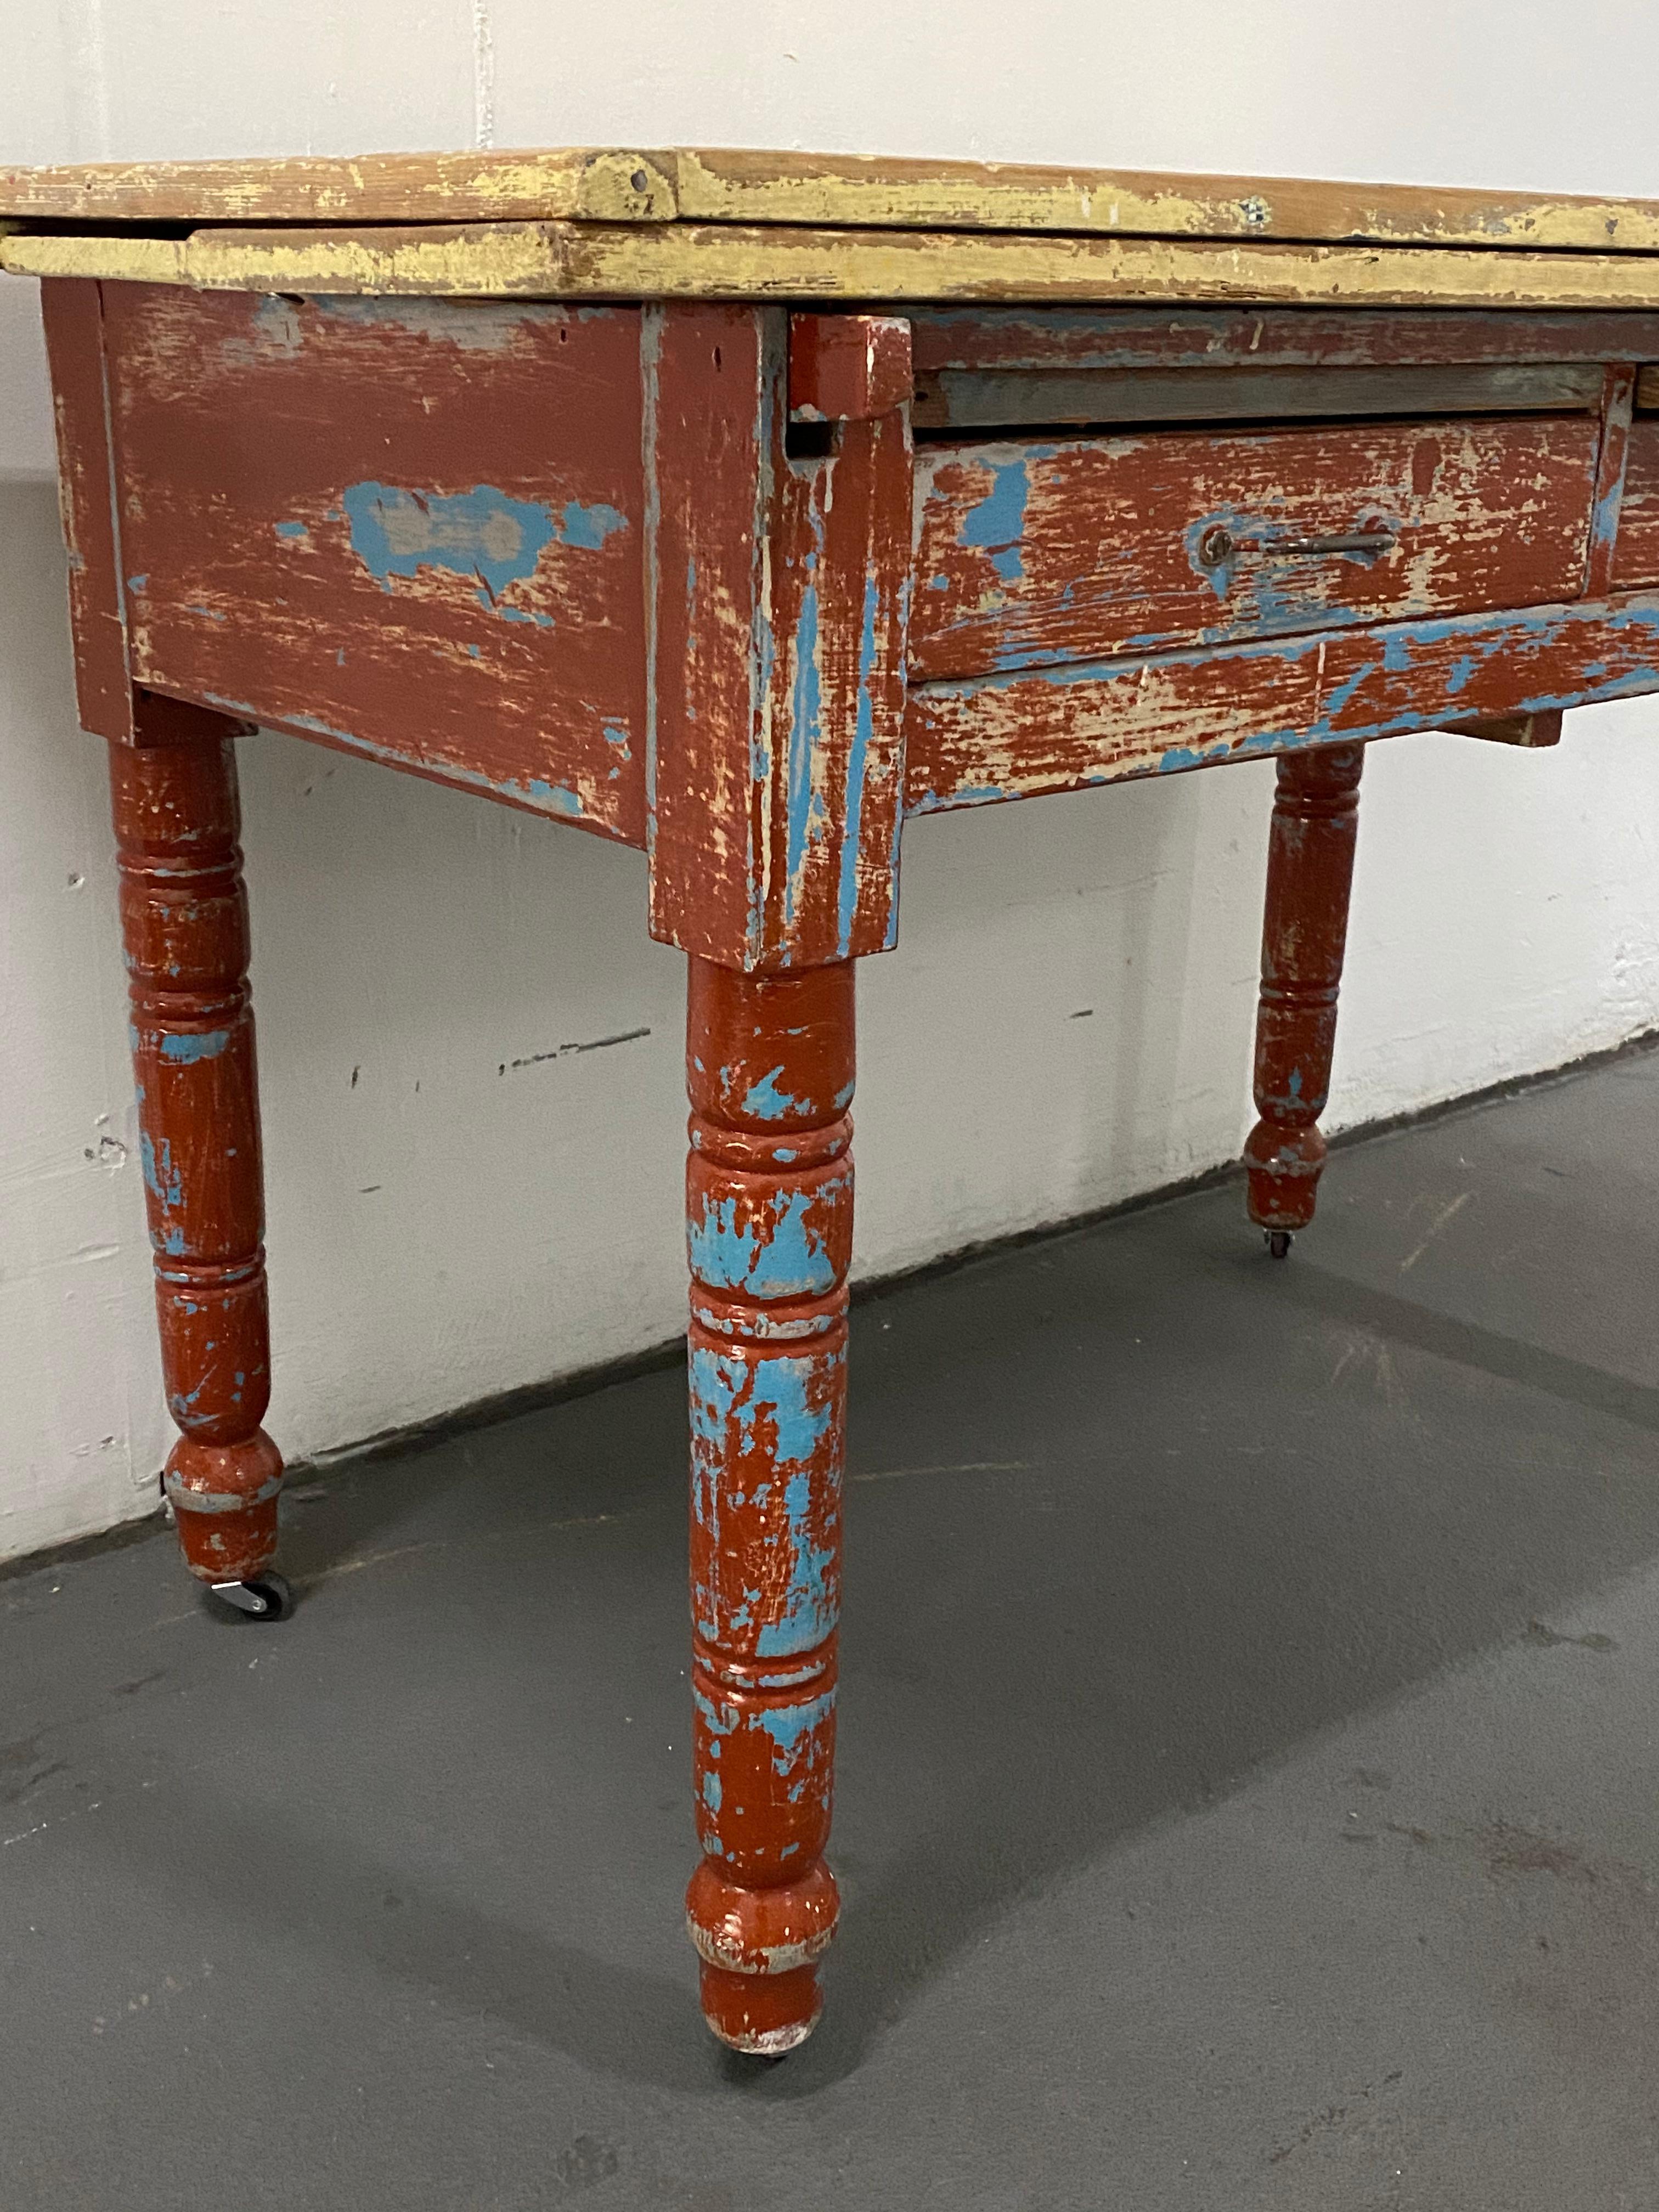 Rustic Vintage Painted Table with Two Drawers and Turned Legs, circa 1930